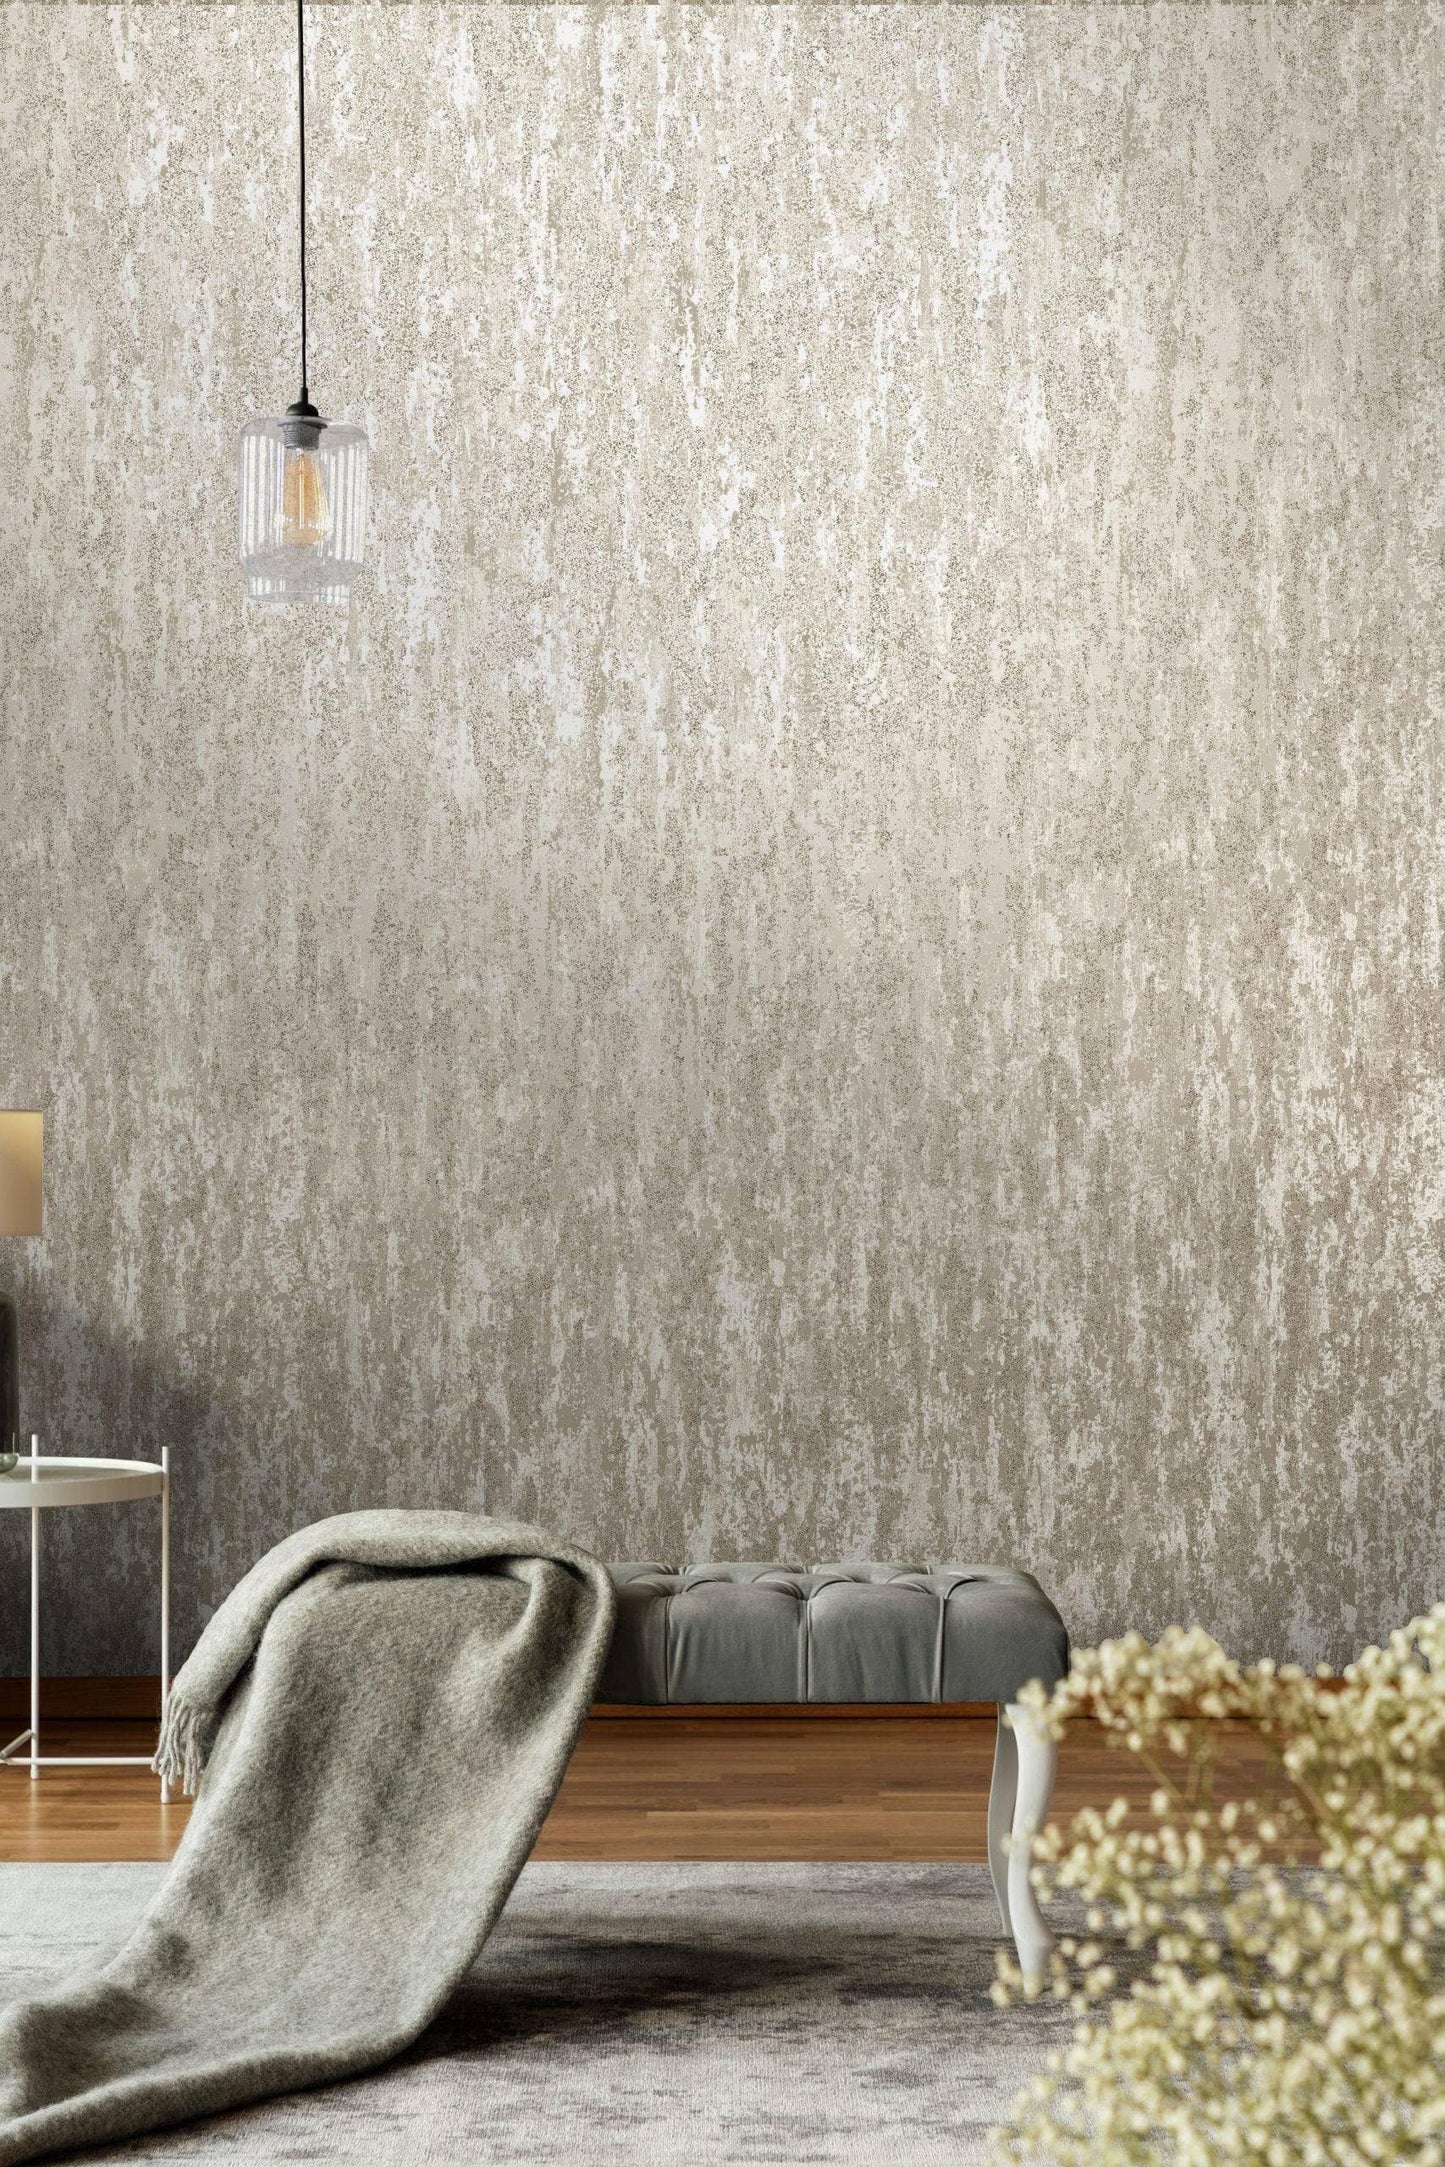 Wallpaper  -  Holden Enigma Beads Taupe Wallpaper - 99362  -  50154580